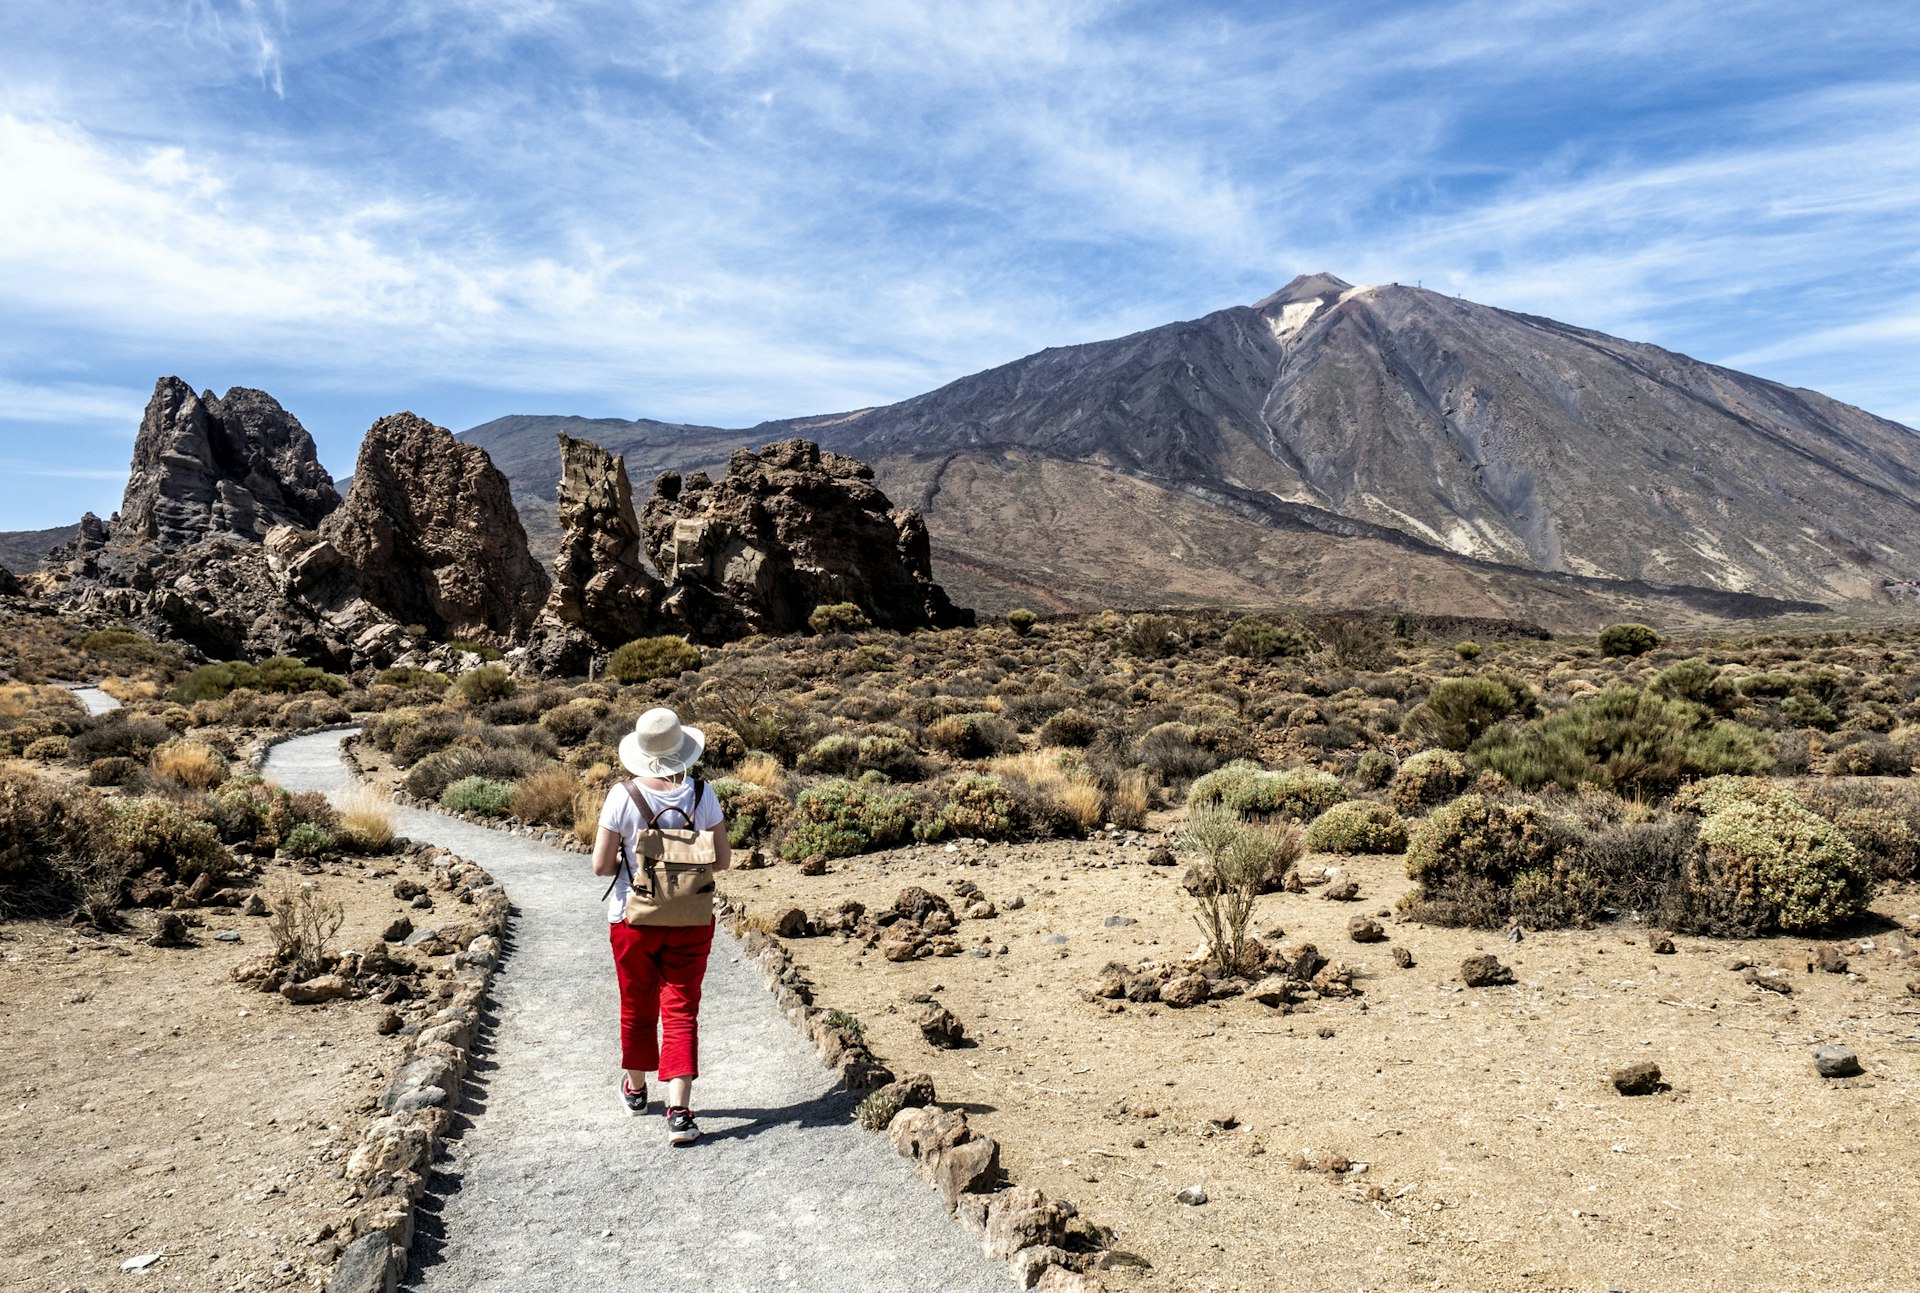 A woman hiking through a volcanic mountain landscape in Tenerife, Canary Islands